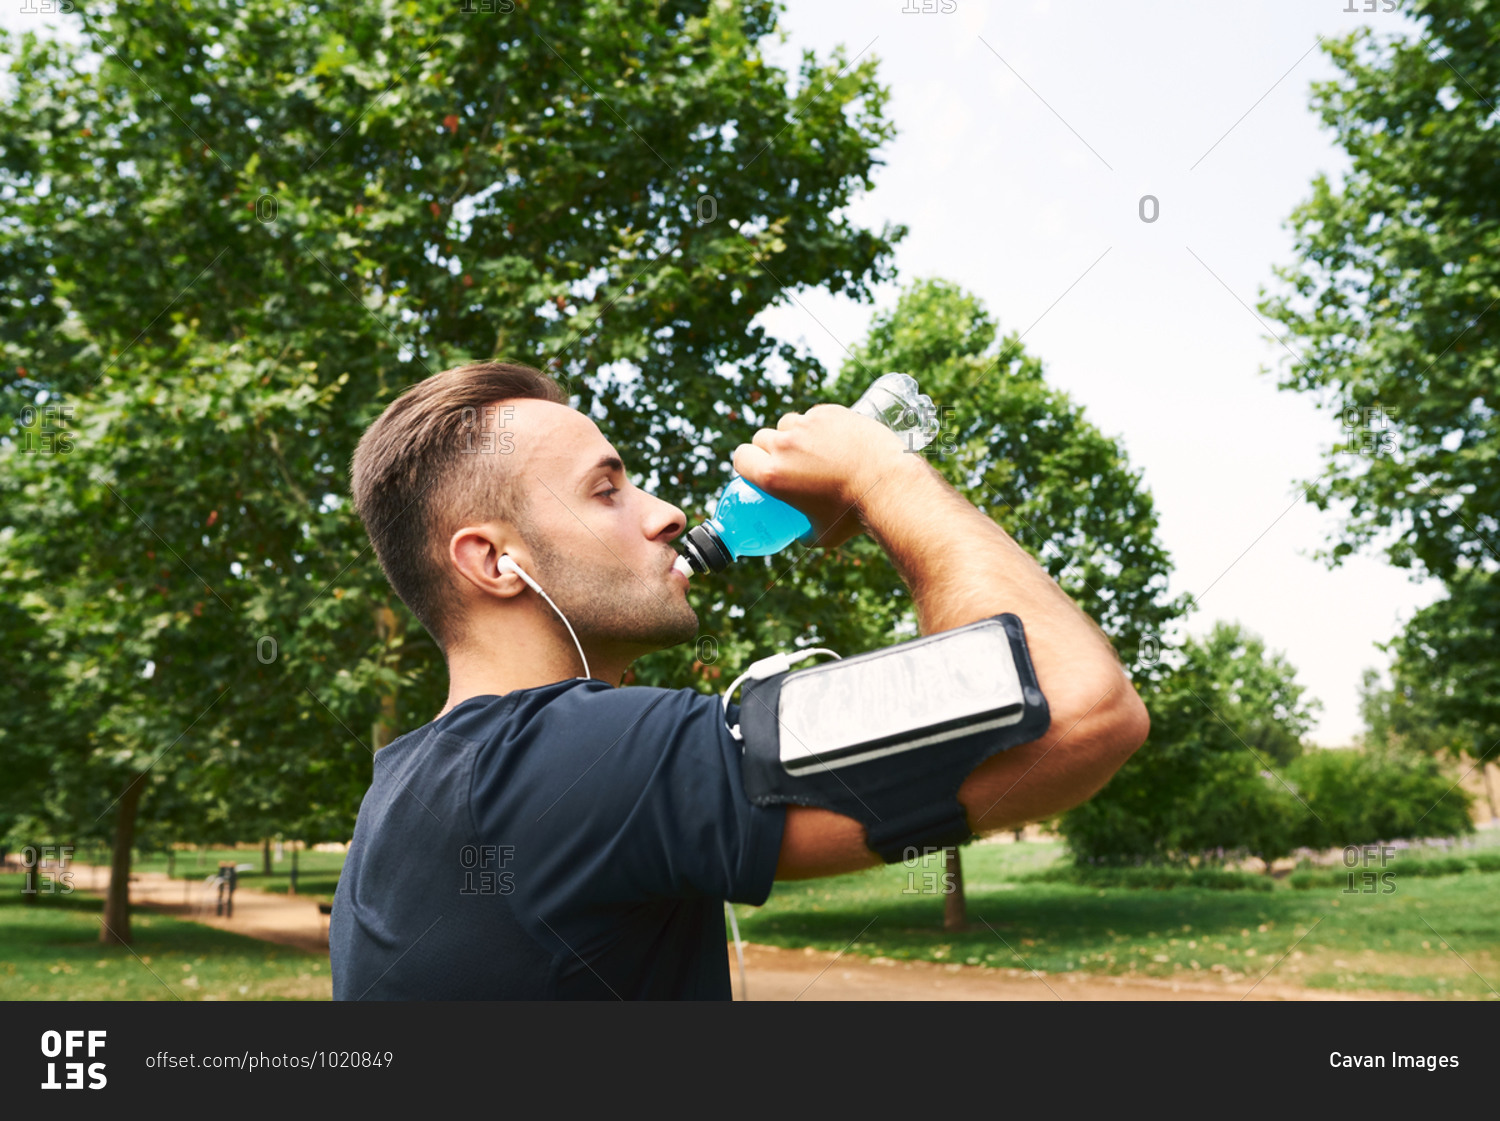 Man drinking sports drink after training. he is in an outdoor park.